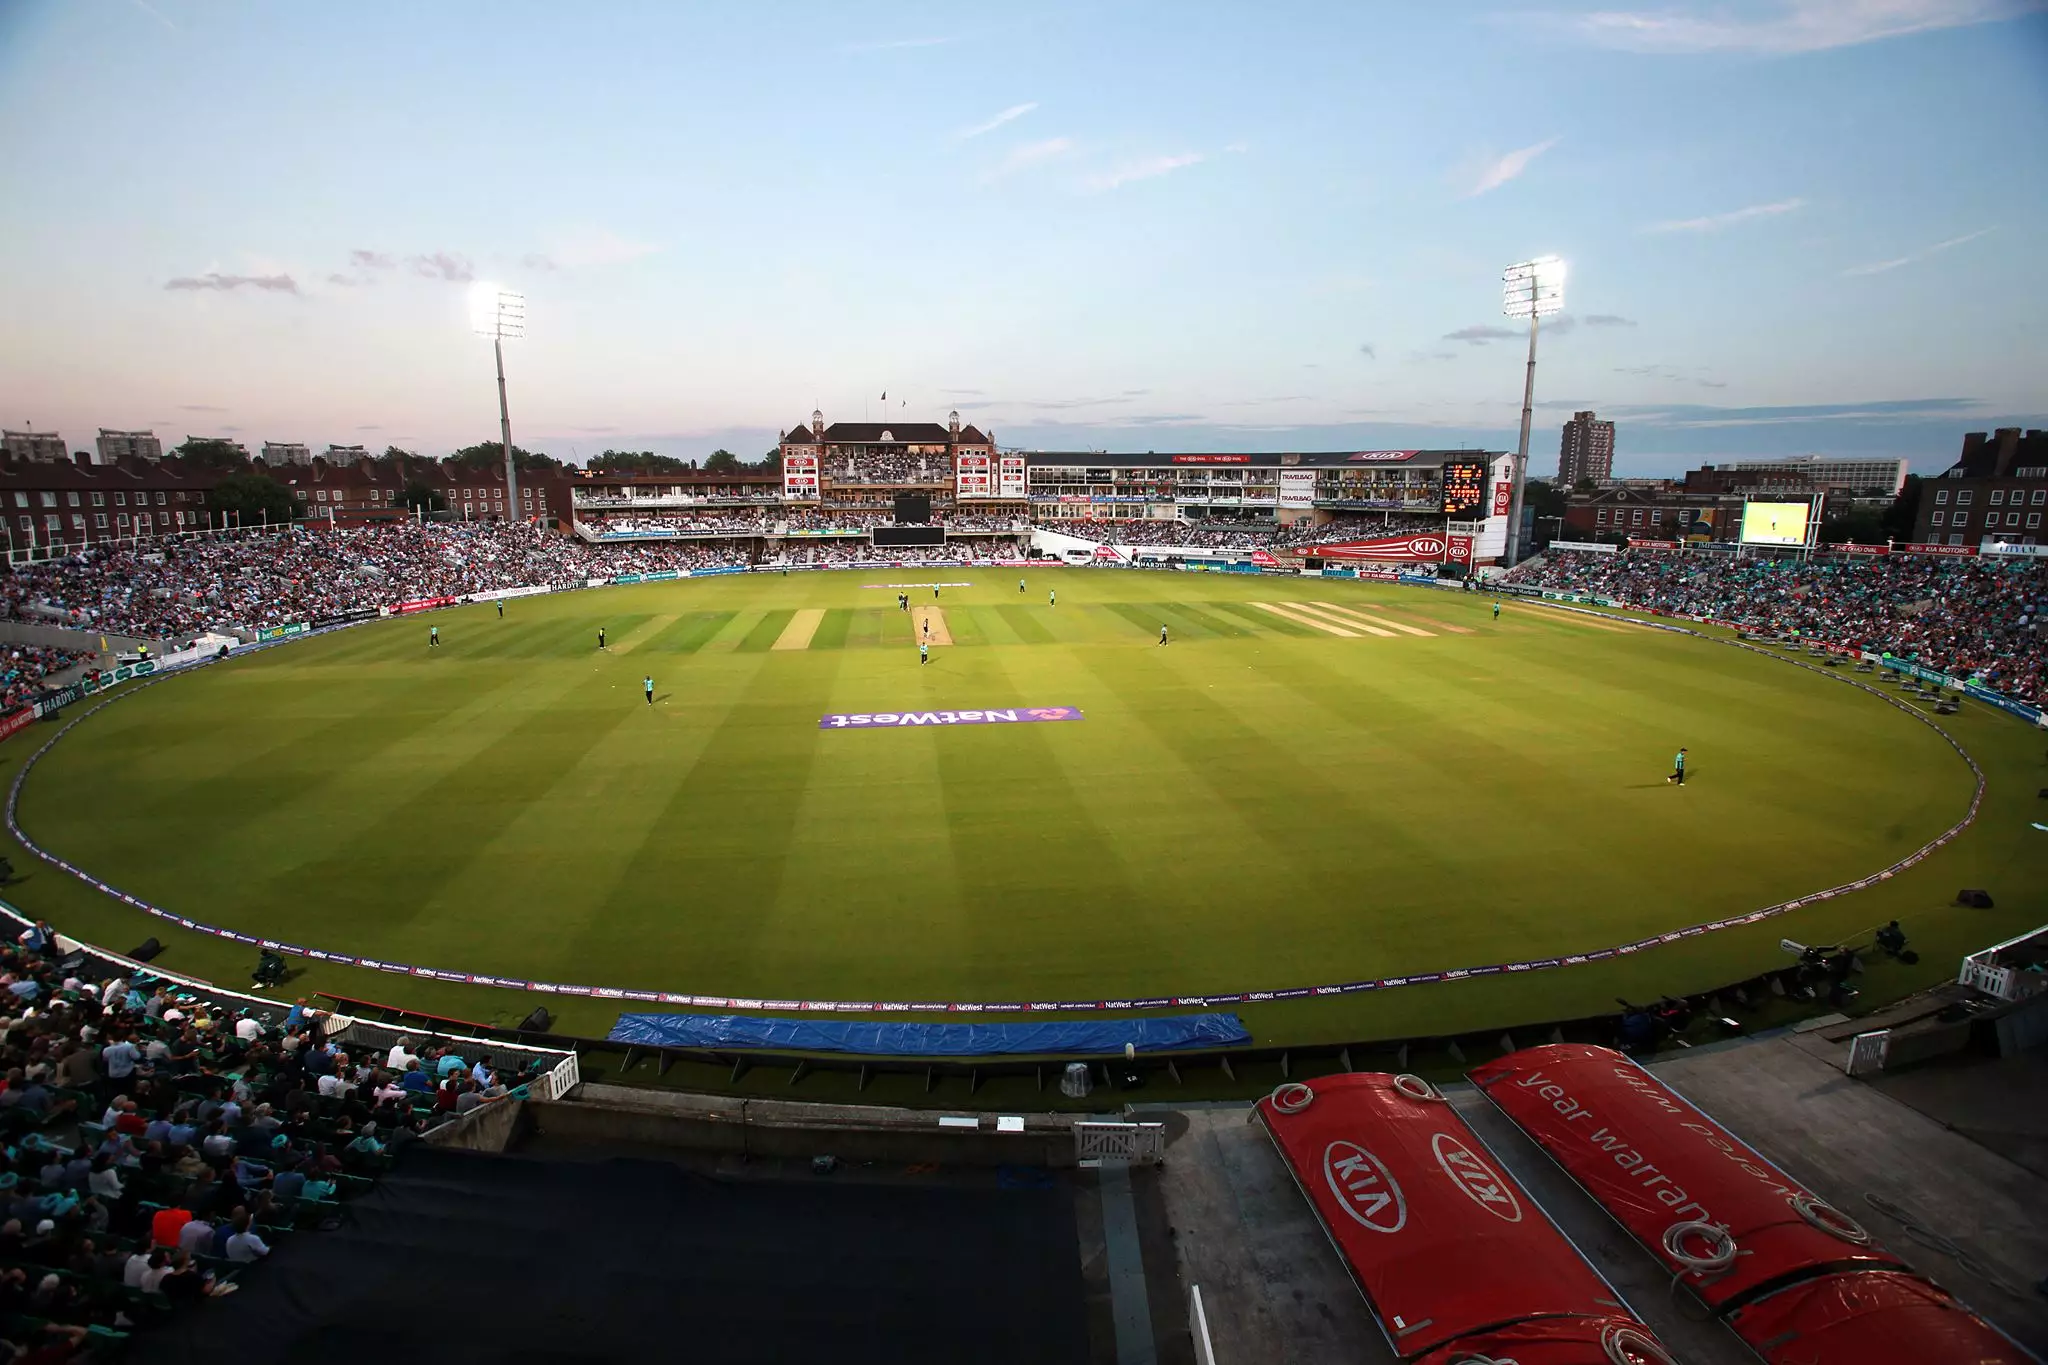 ECB Finally Planning To Rival IPL And Big Bash